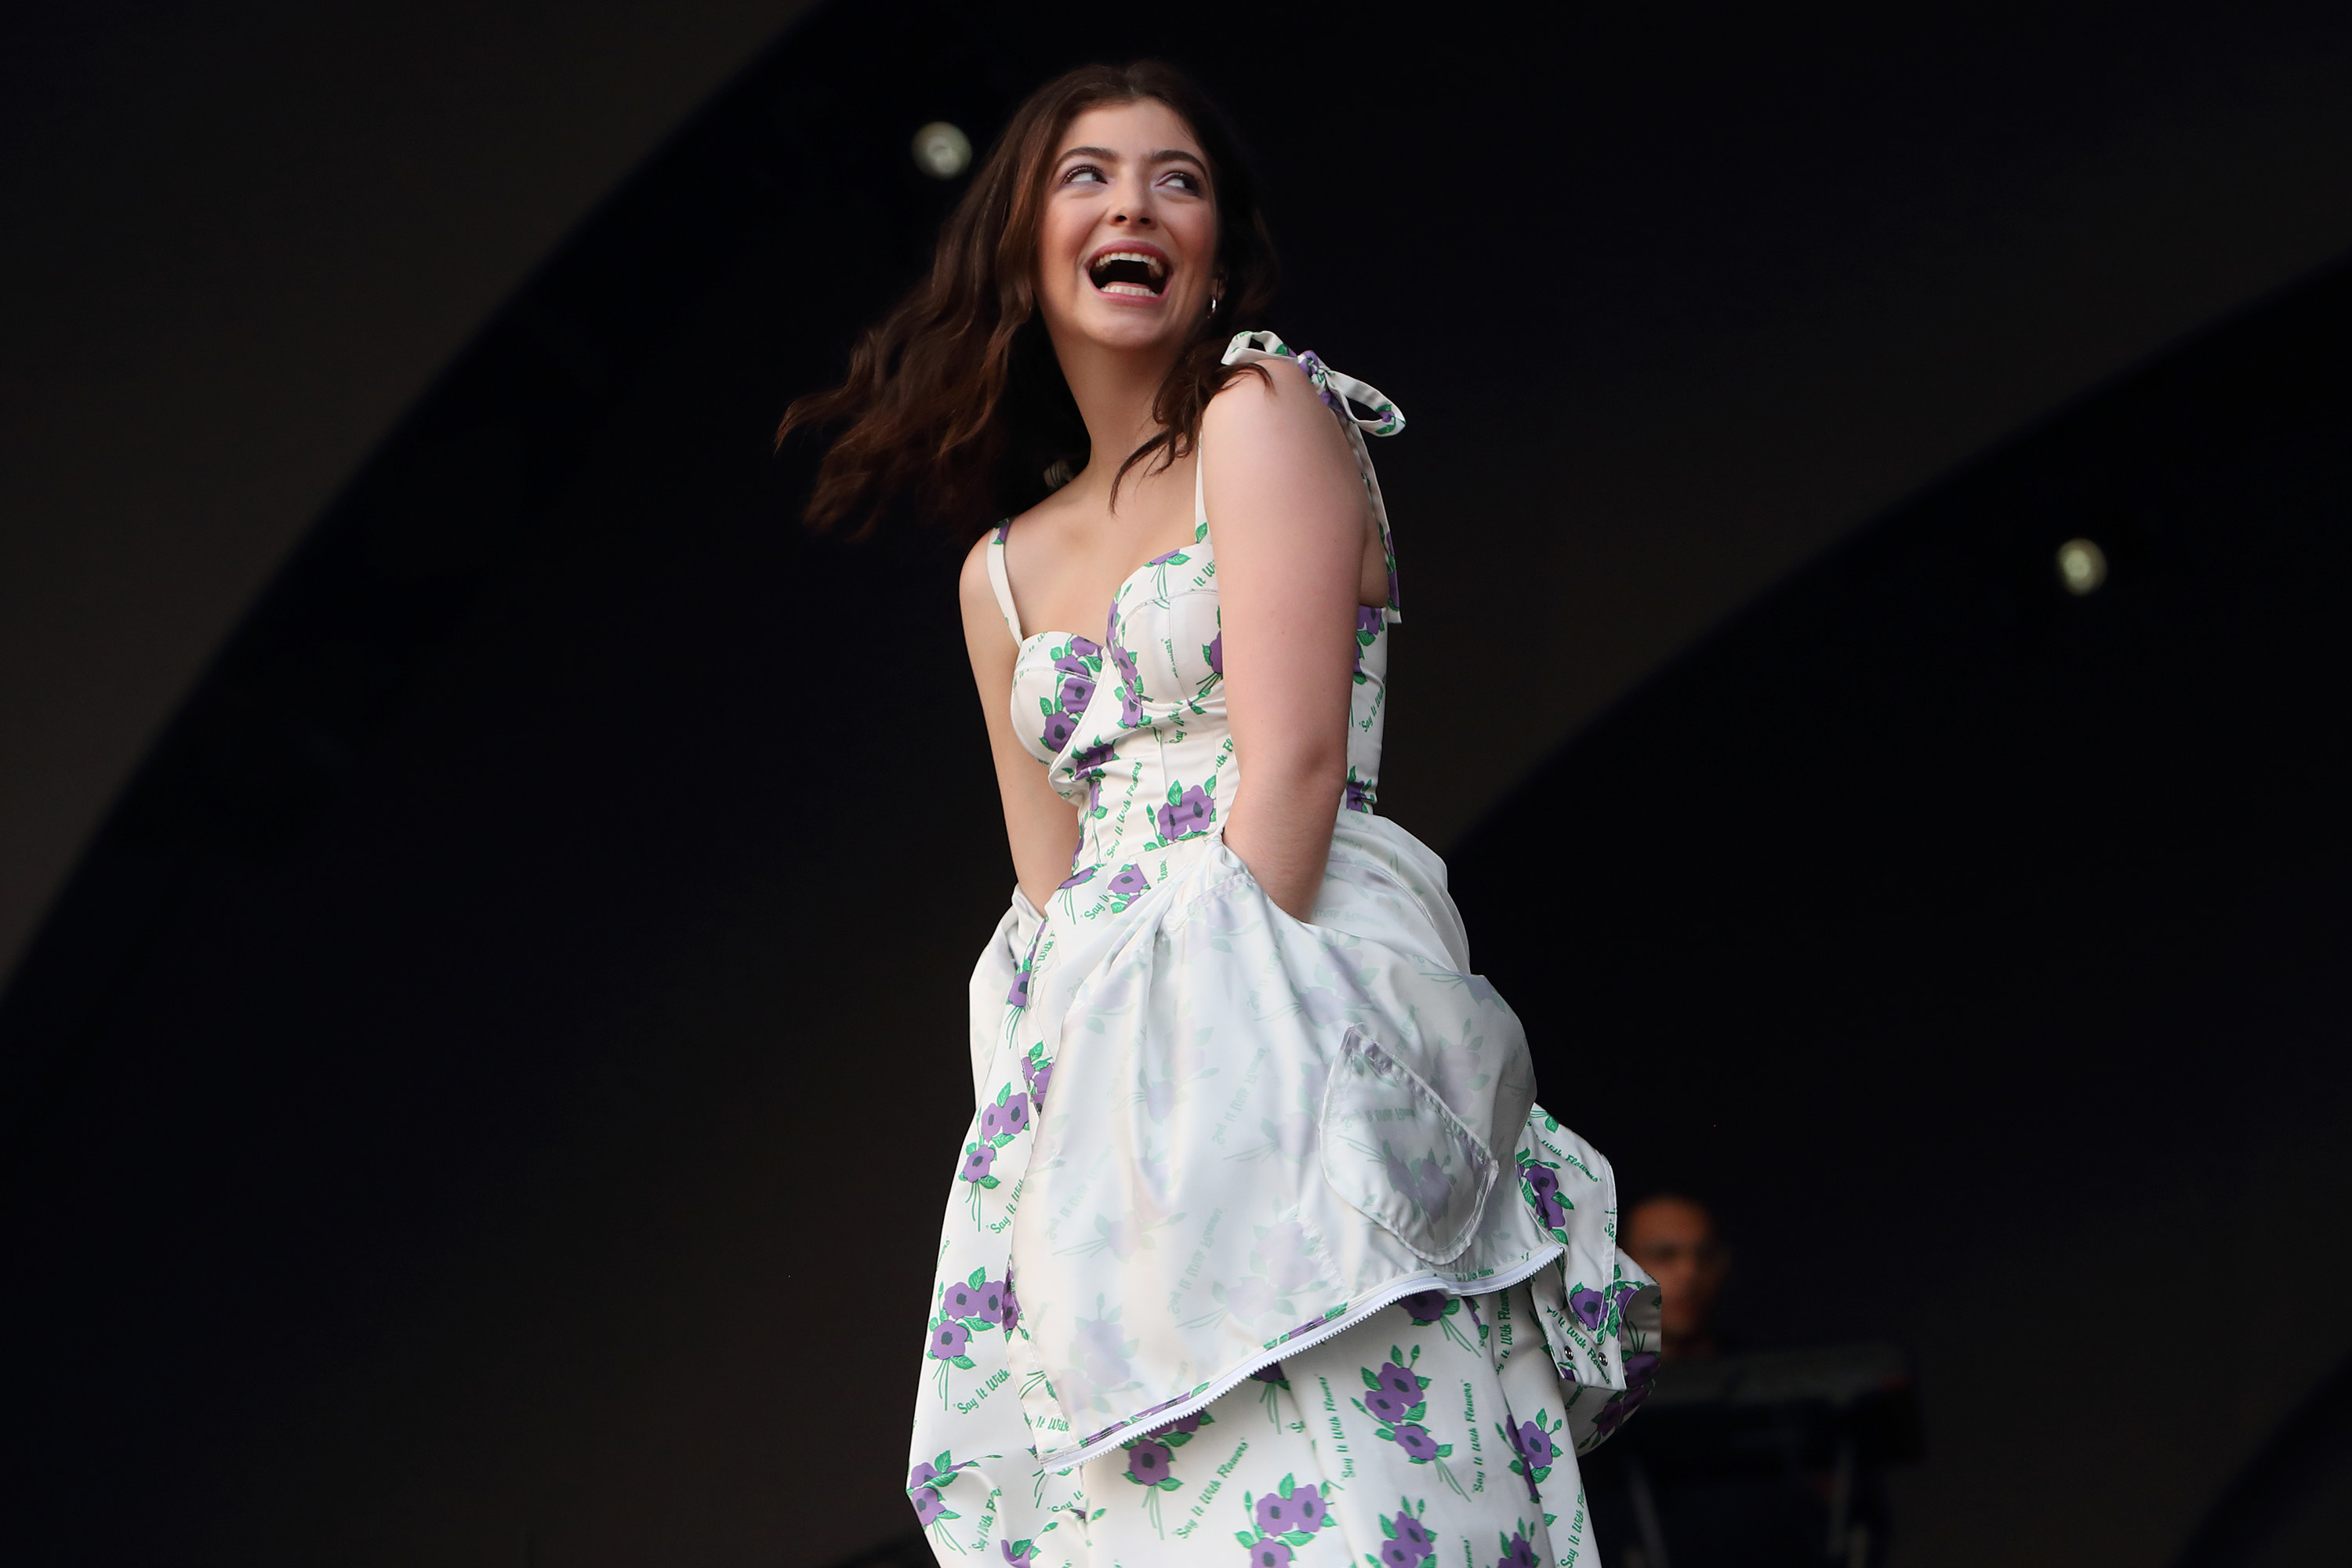 Lorde smiles while performing at All Points East Festival at Victoria Park in London in 2018